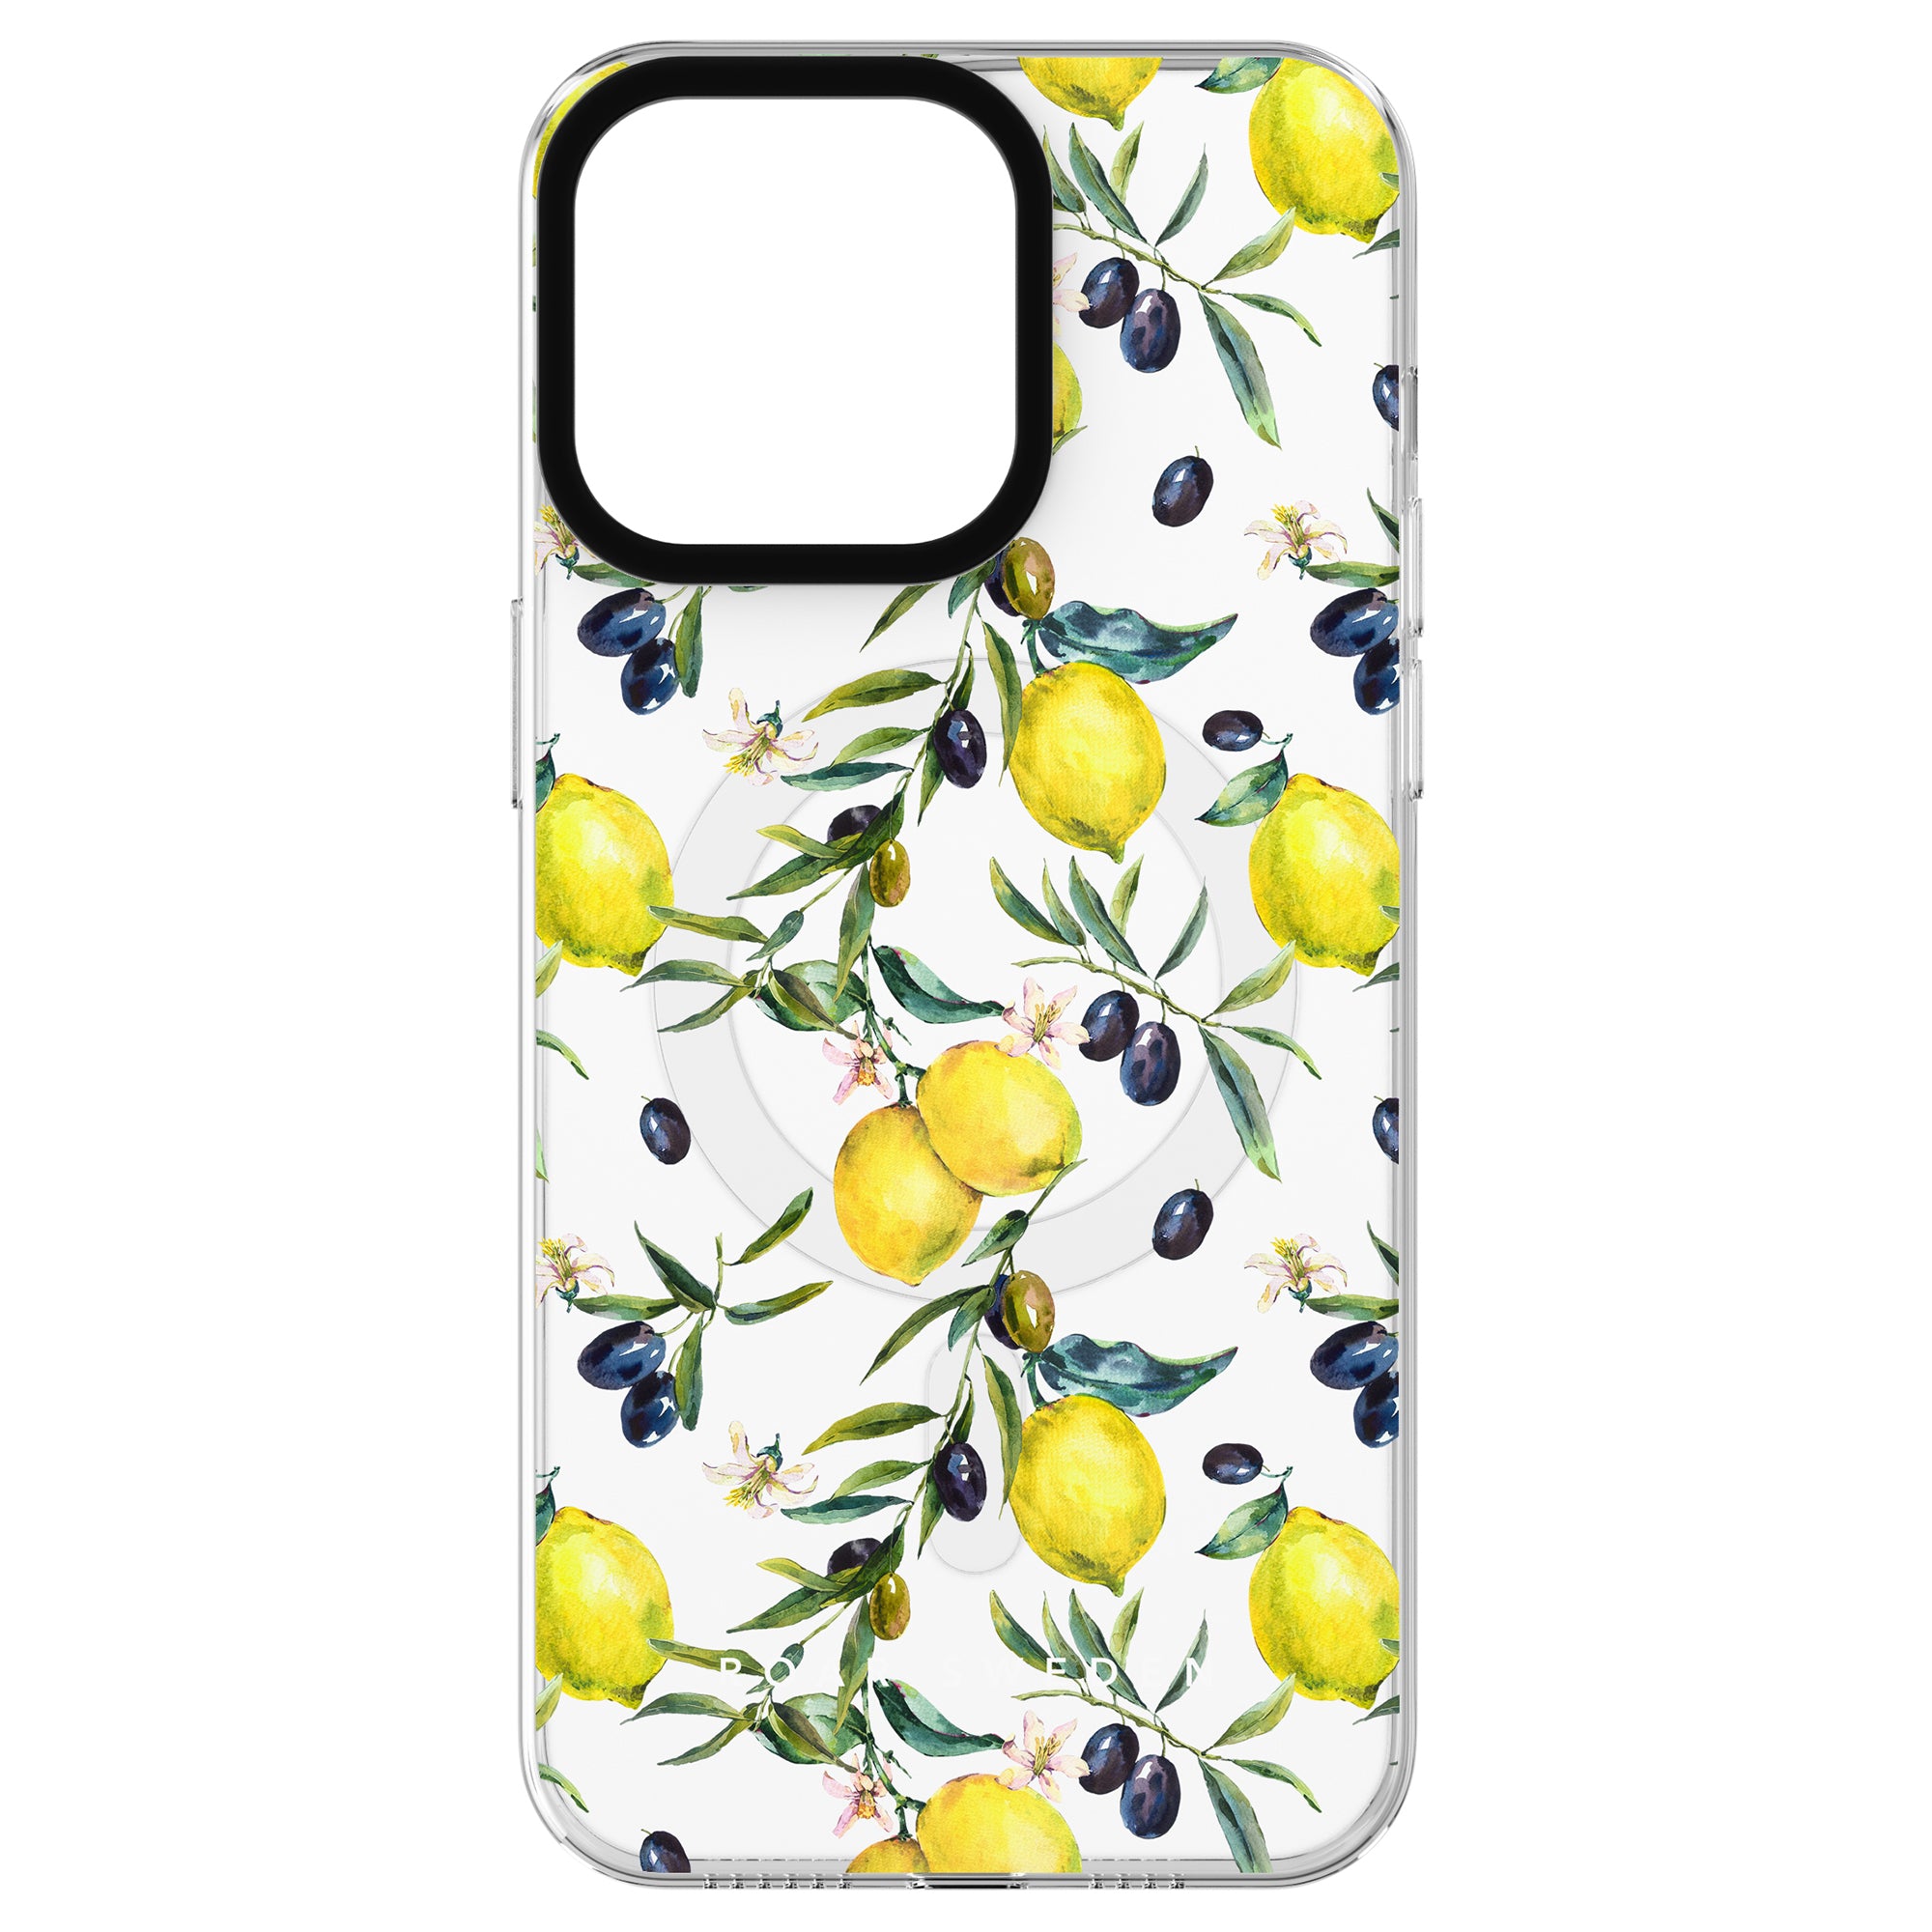 A phone case from the Lemon Garden - MagSafe featuring a design of lemons, olives, and green leaves on a white background.